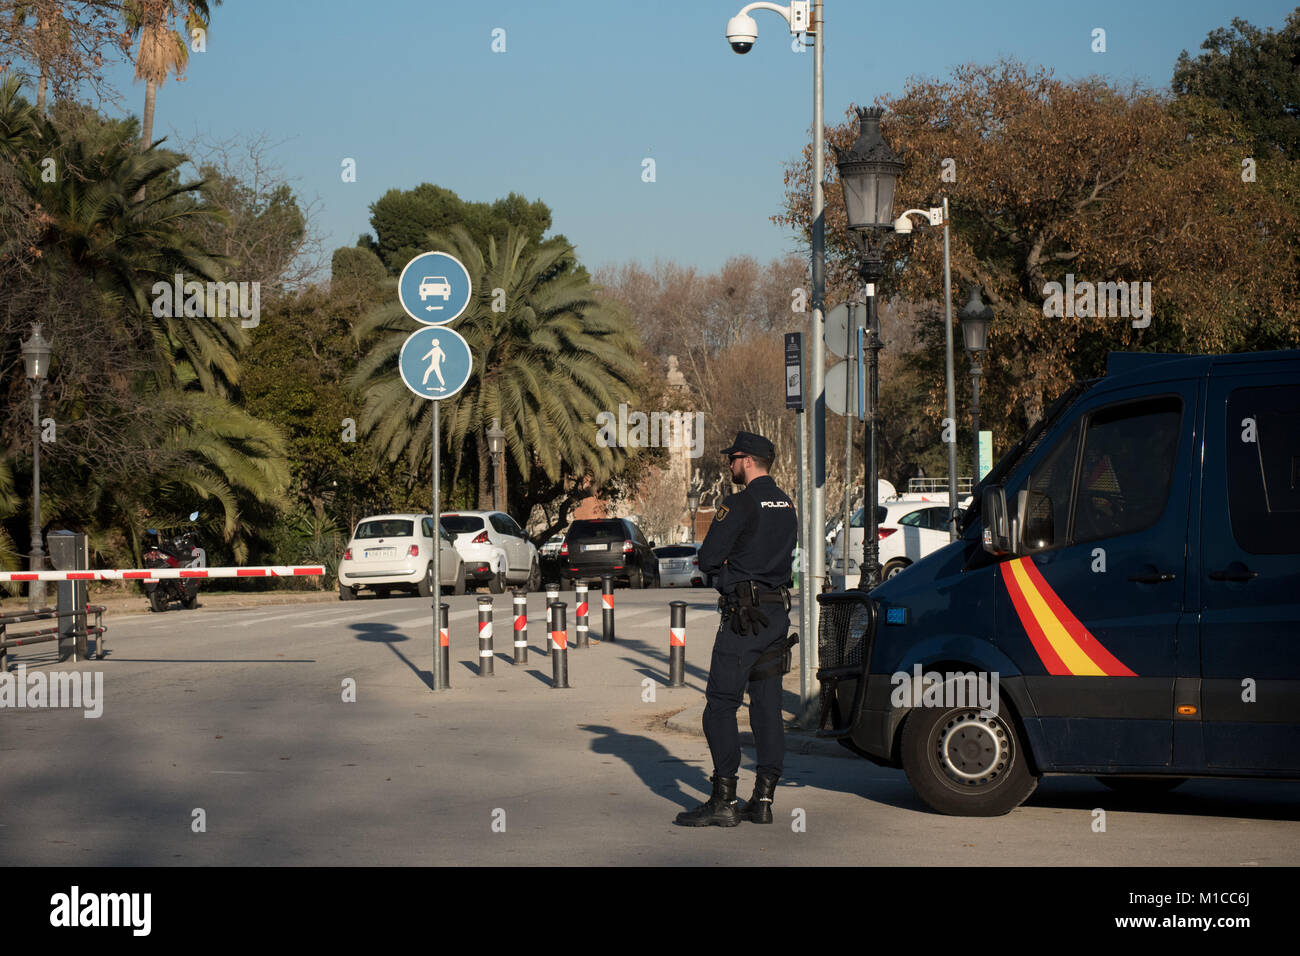 January 29, 2018 - Barcelona, Catalonia, Spain -  In Barcelona a Spanish police officer Policia Nacional  stands guard to the acces to the Catalan Parliament building hours prior President investiture debate. The Catalan Parliament  convened the debate on investing Carles Puigdemont as president of Catalonia for Tuesday 30th January. The announcement came despite threats from the Spanish government that they would challenge a potential Puigdemont candidacy to Spain's Constitutional Court. Stock Photo